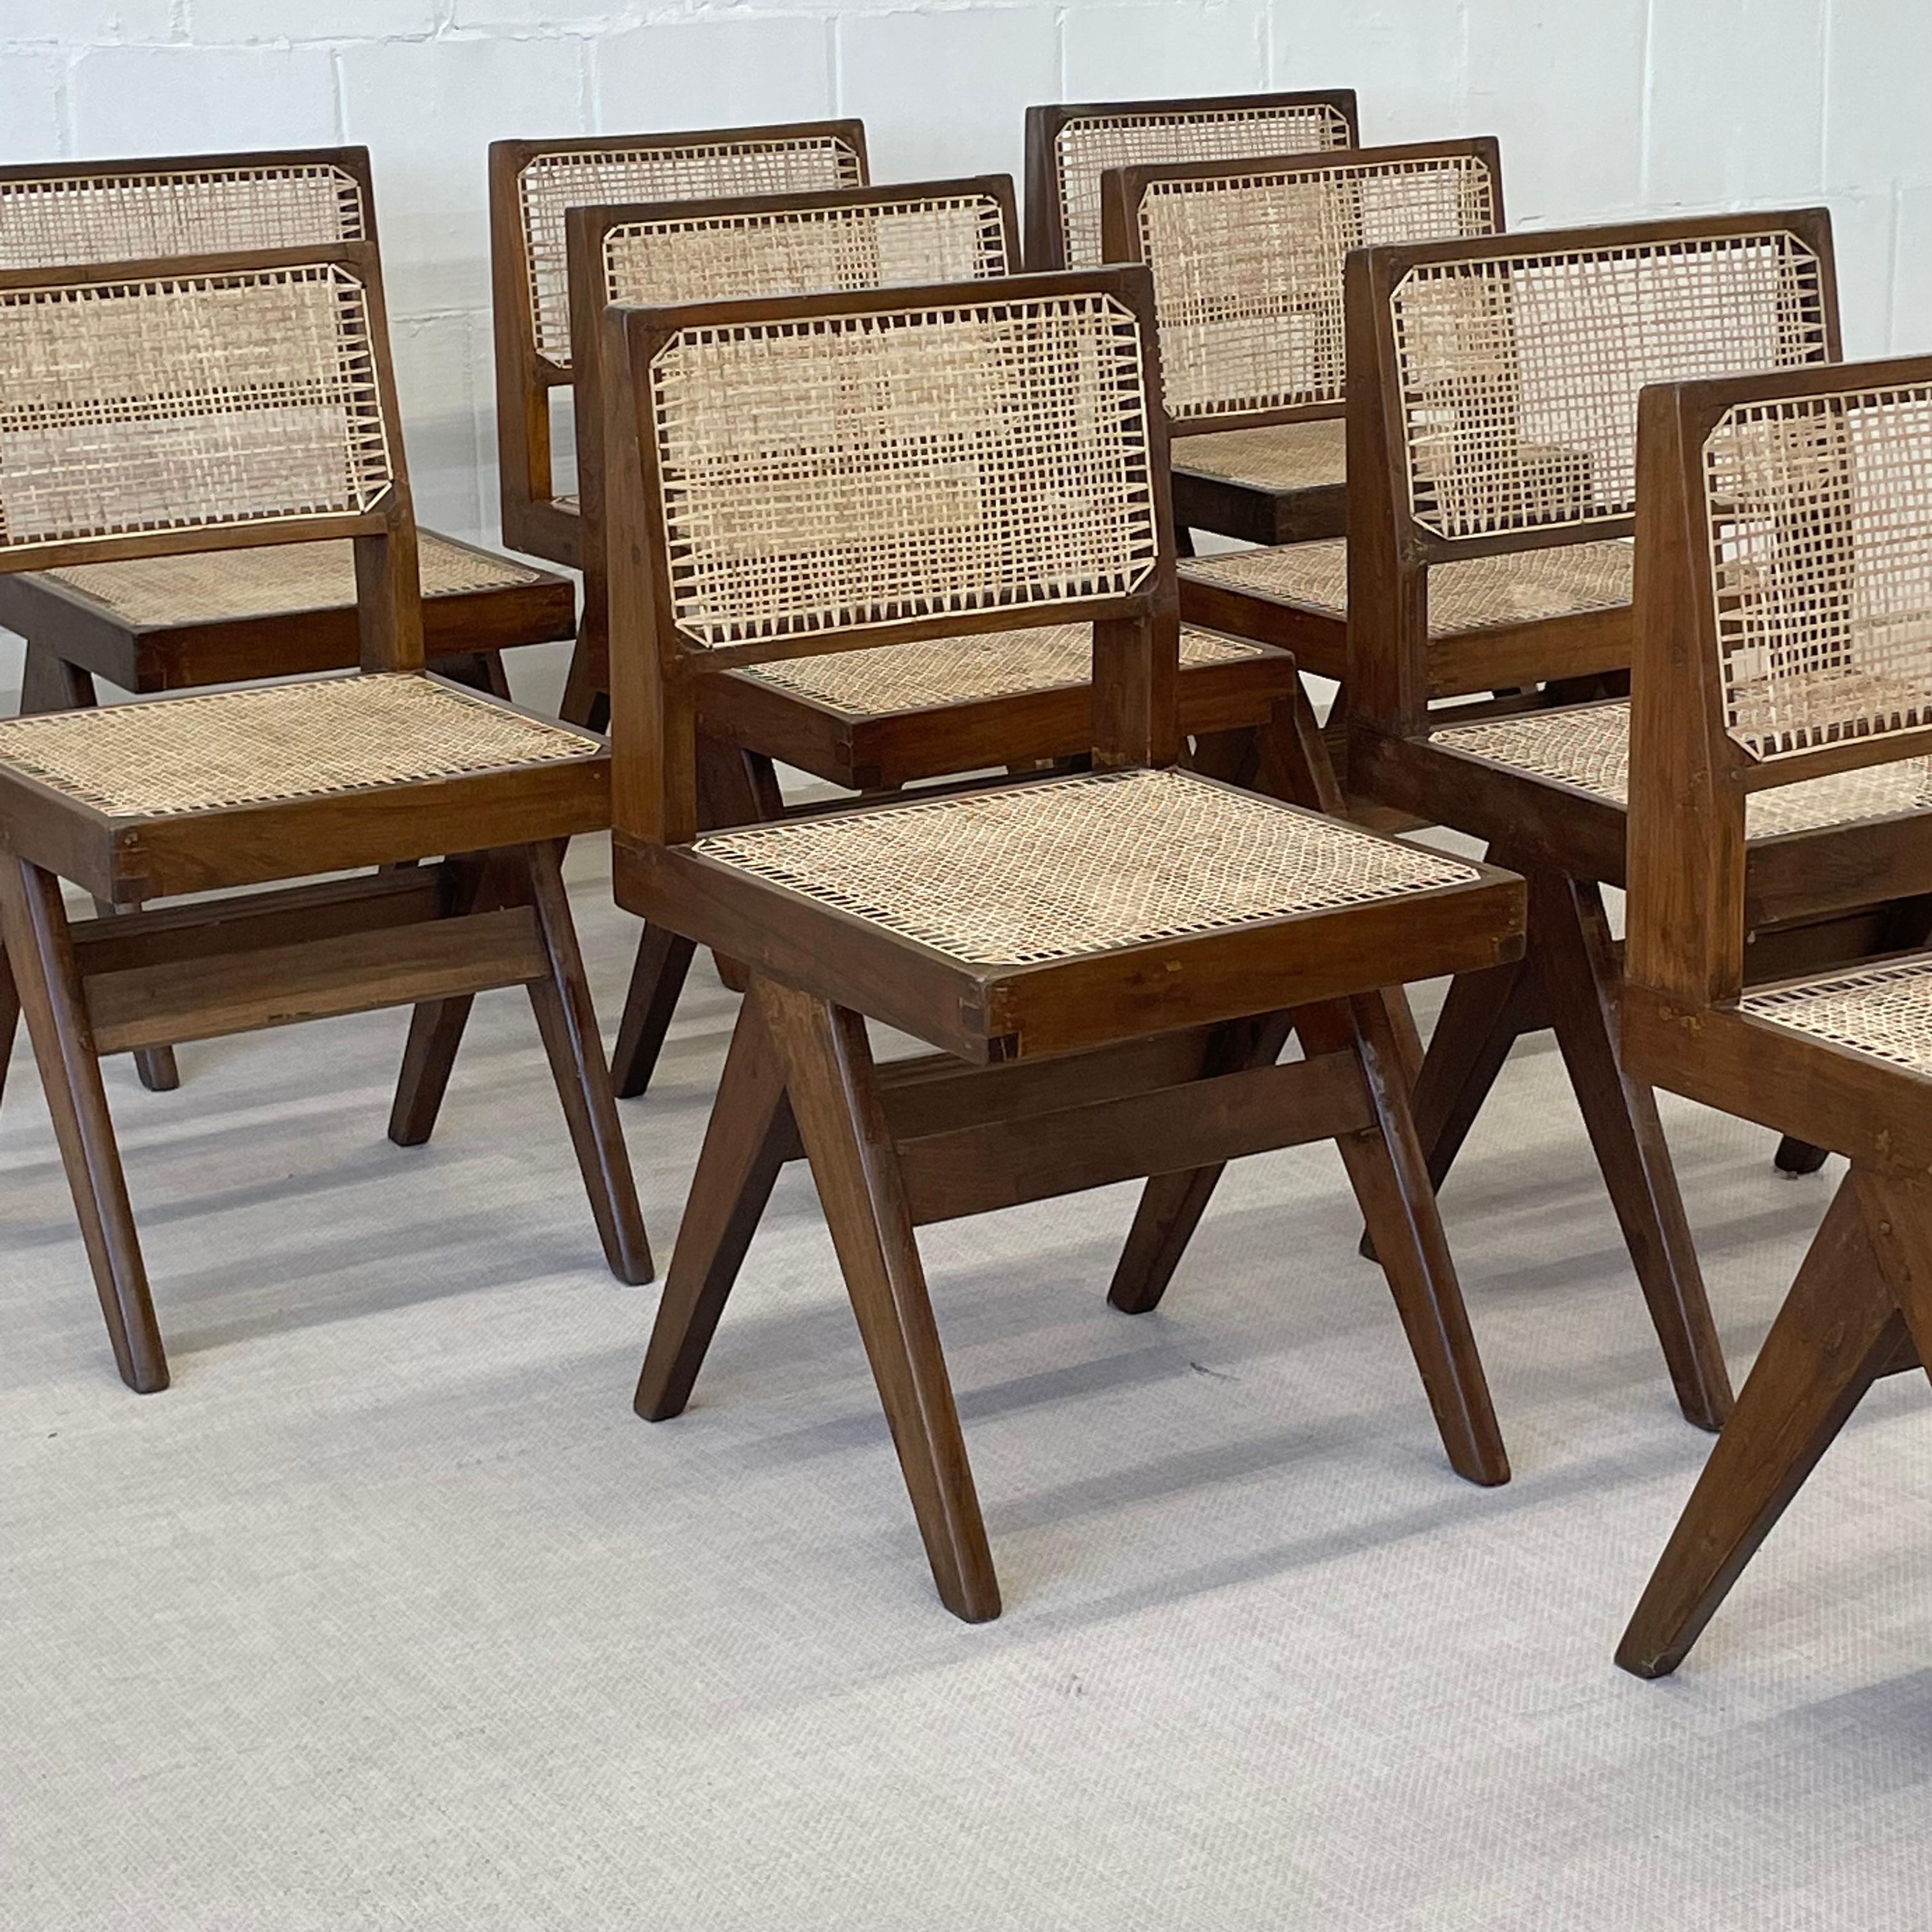 10 Pierre Jeanneret Armless Dining Chairs, Teak, Cane, France/India 2